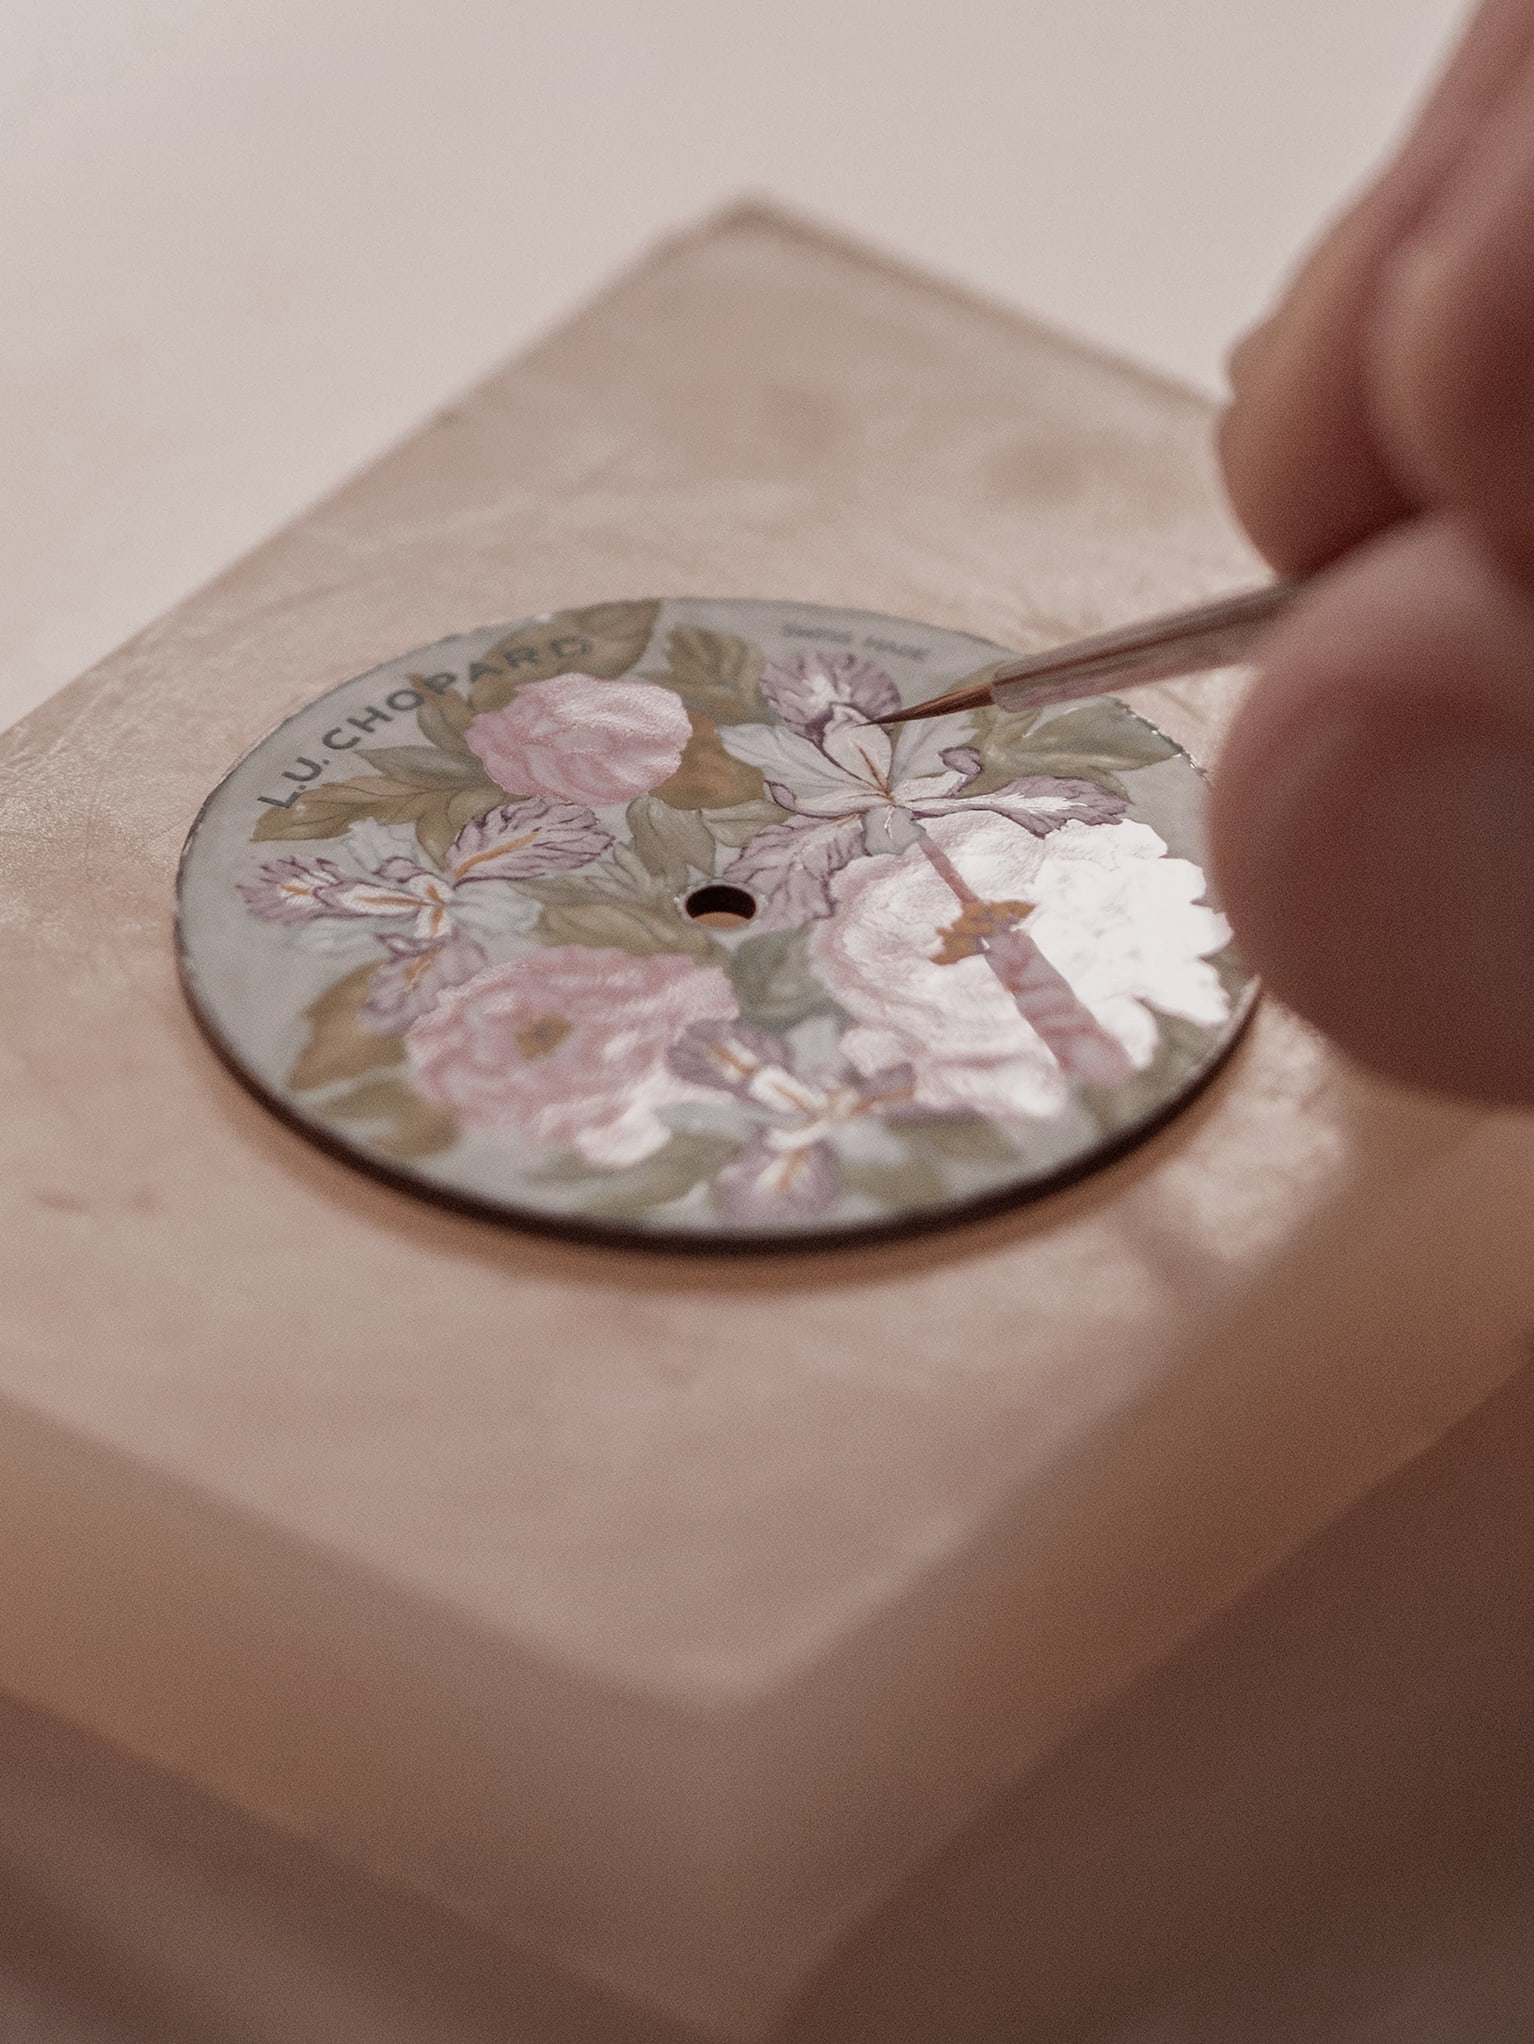 A Chopard Artisan painting a luxury watch case